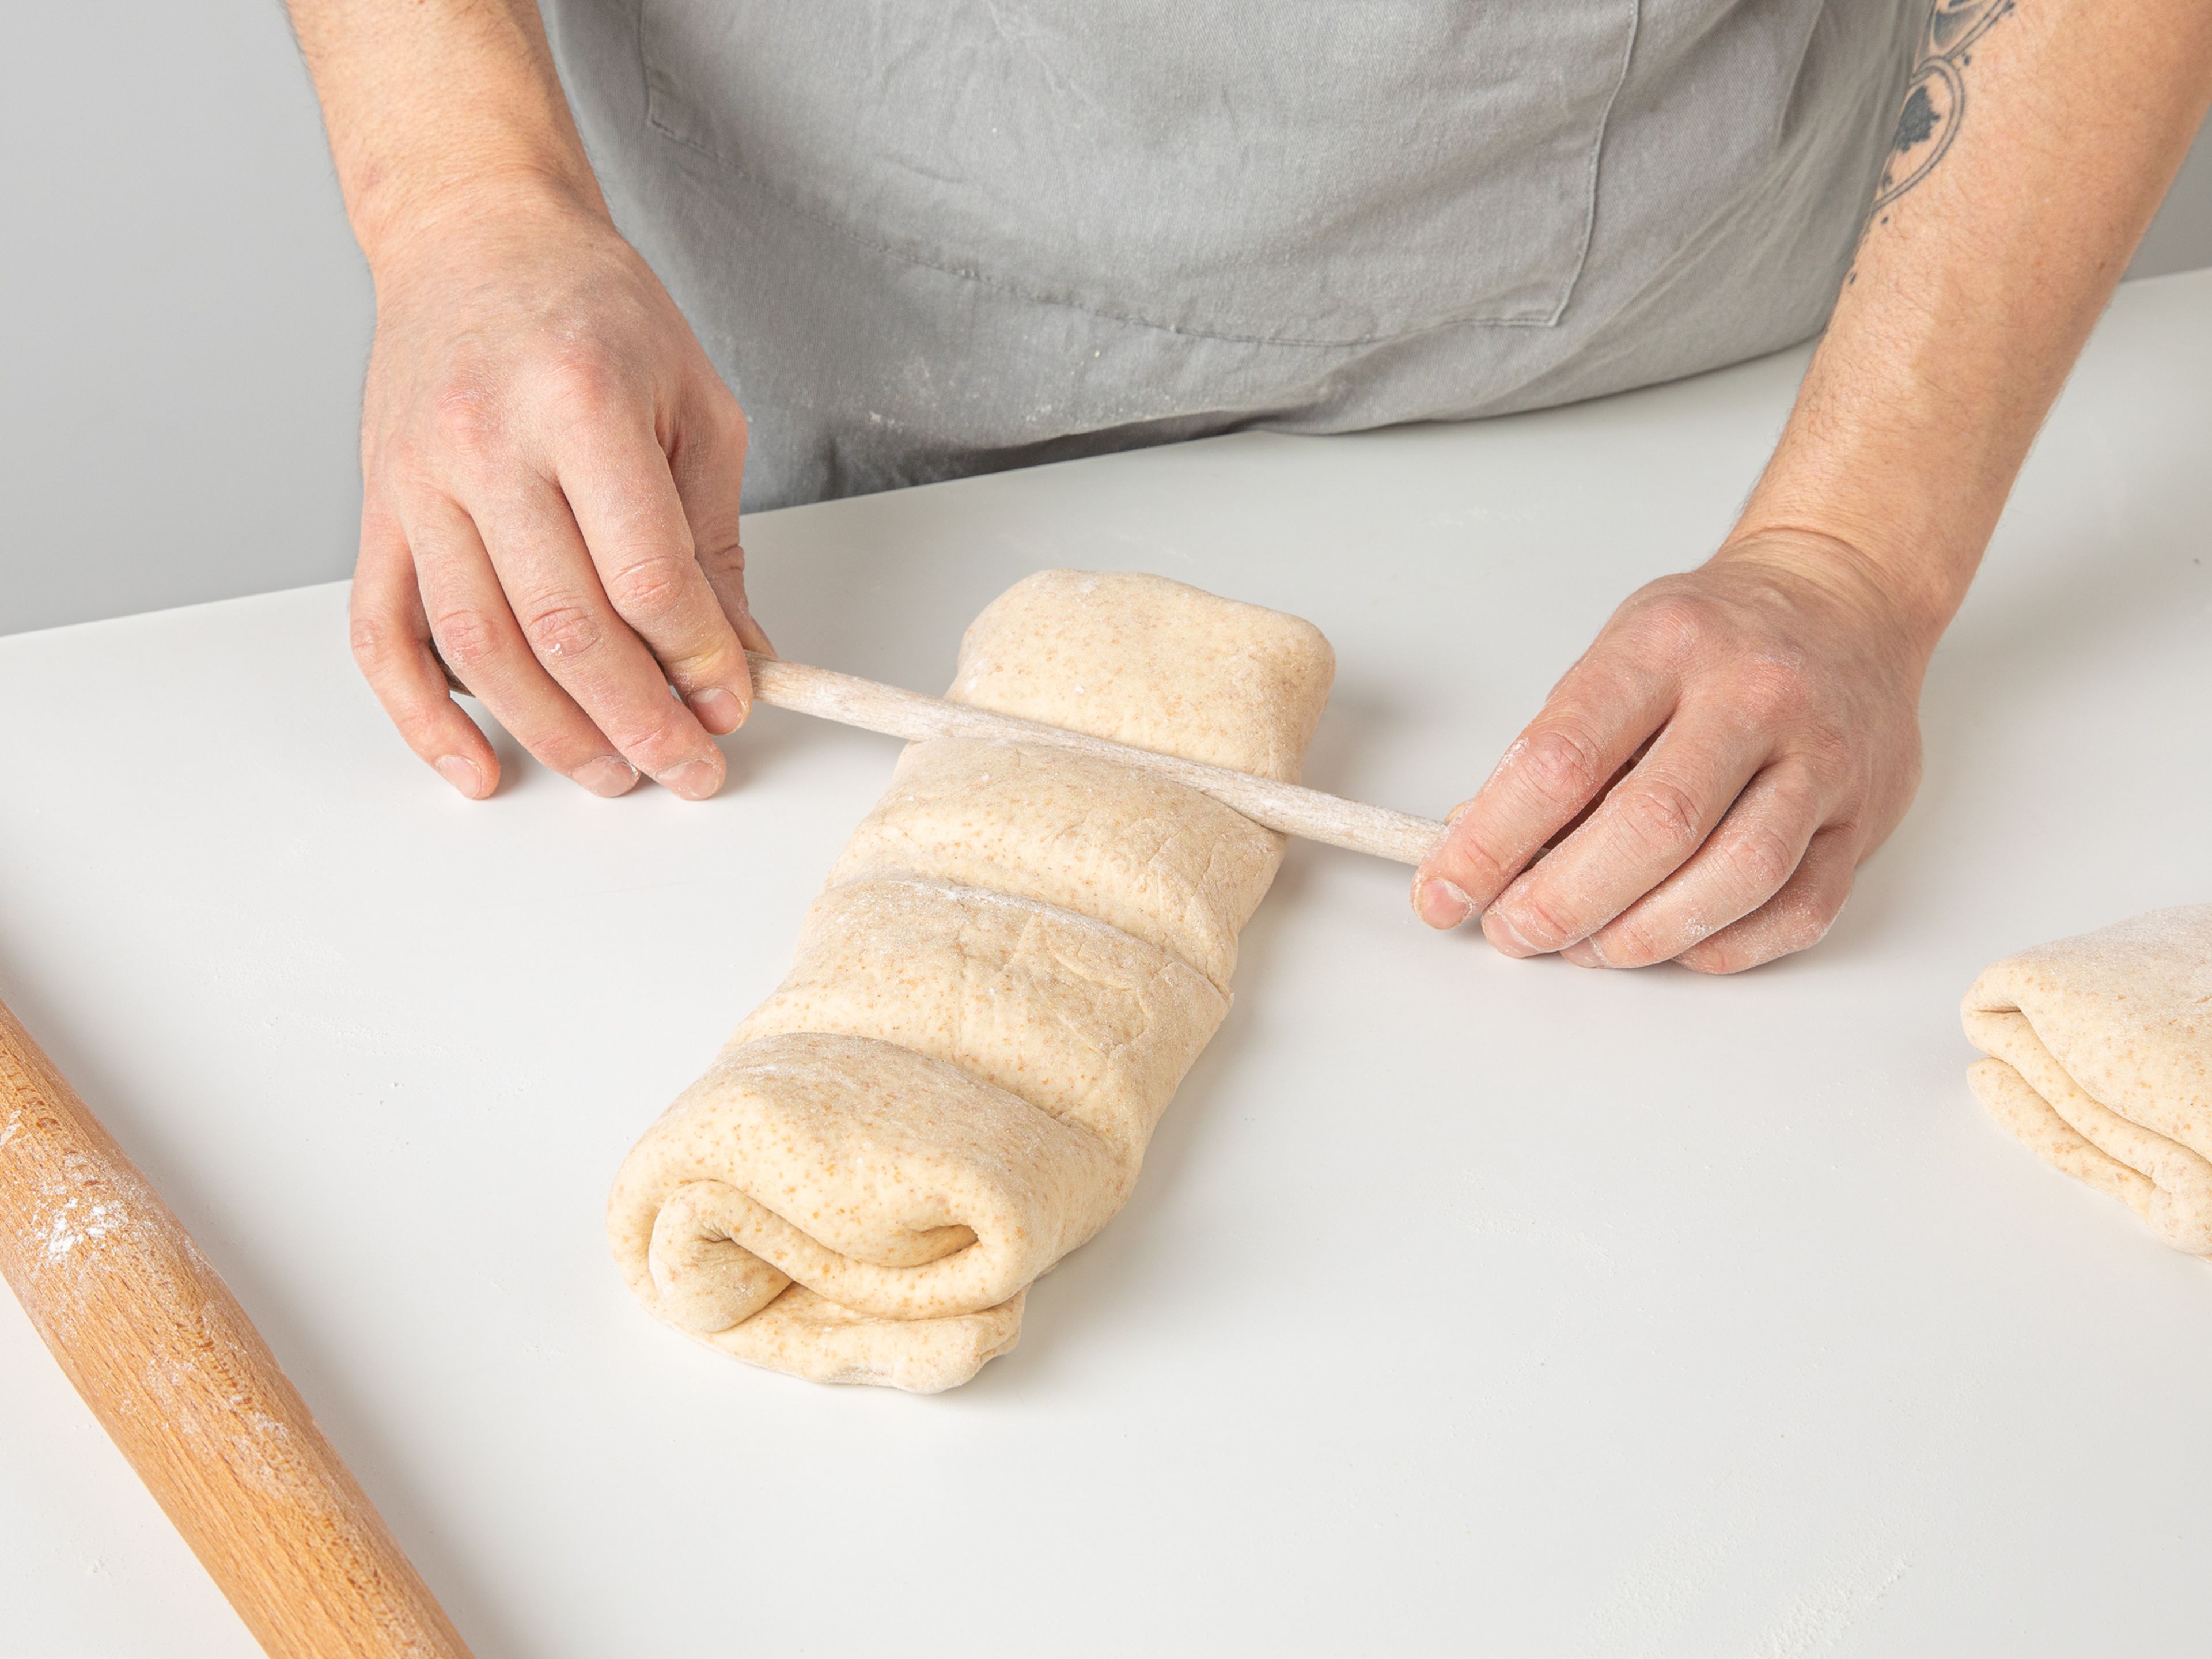 Use the handle of a wooden spoon to press down the dough while not cutting all the way through it, to create four lines on the bread roll. This will divide the bread into four equal pieces and make it easier to portion after baking. Make a shallow diagonal slice on each piece with a small knife. Place the bread rolls on a baking sheet lined with parchment paper. Bake in the preheated oven for approx. 15 min., or until lightly browned on top. Remove the bread from the oven and divide it into portions. Top with a dollop of sour cream and sprinkle with remaining chopped chives. Serve while still warm!